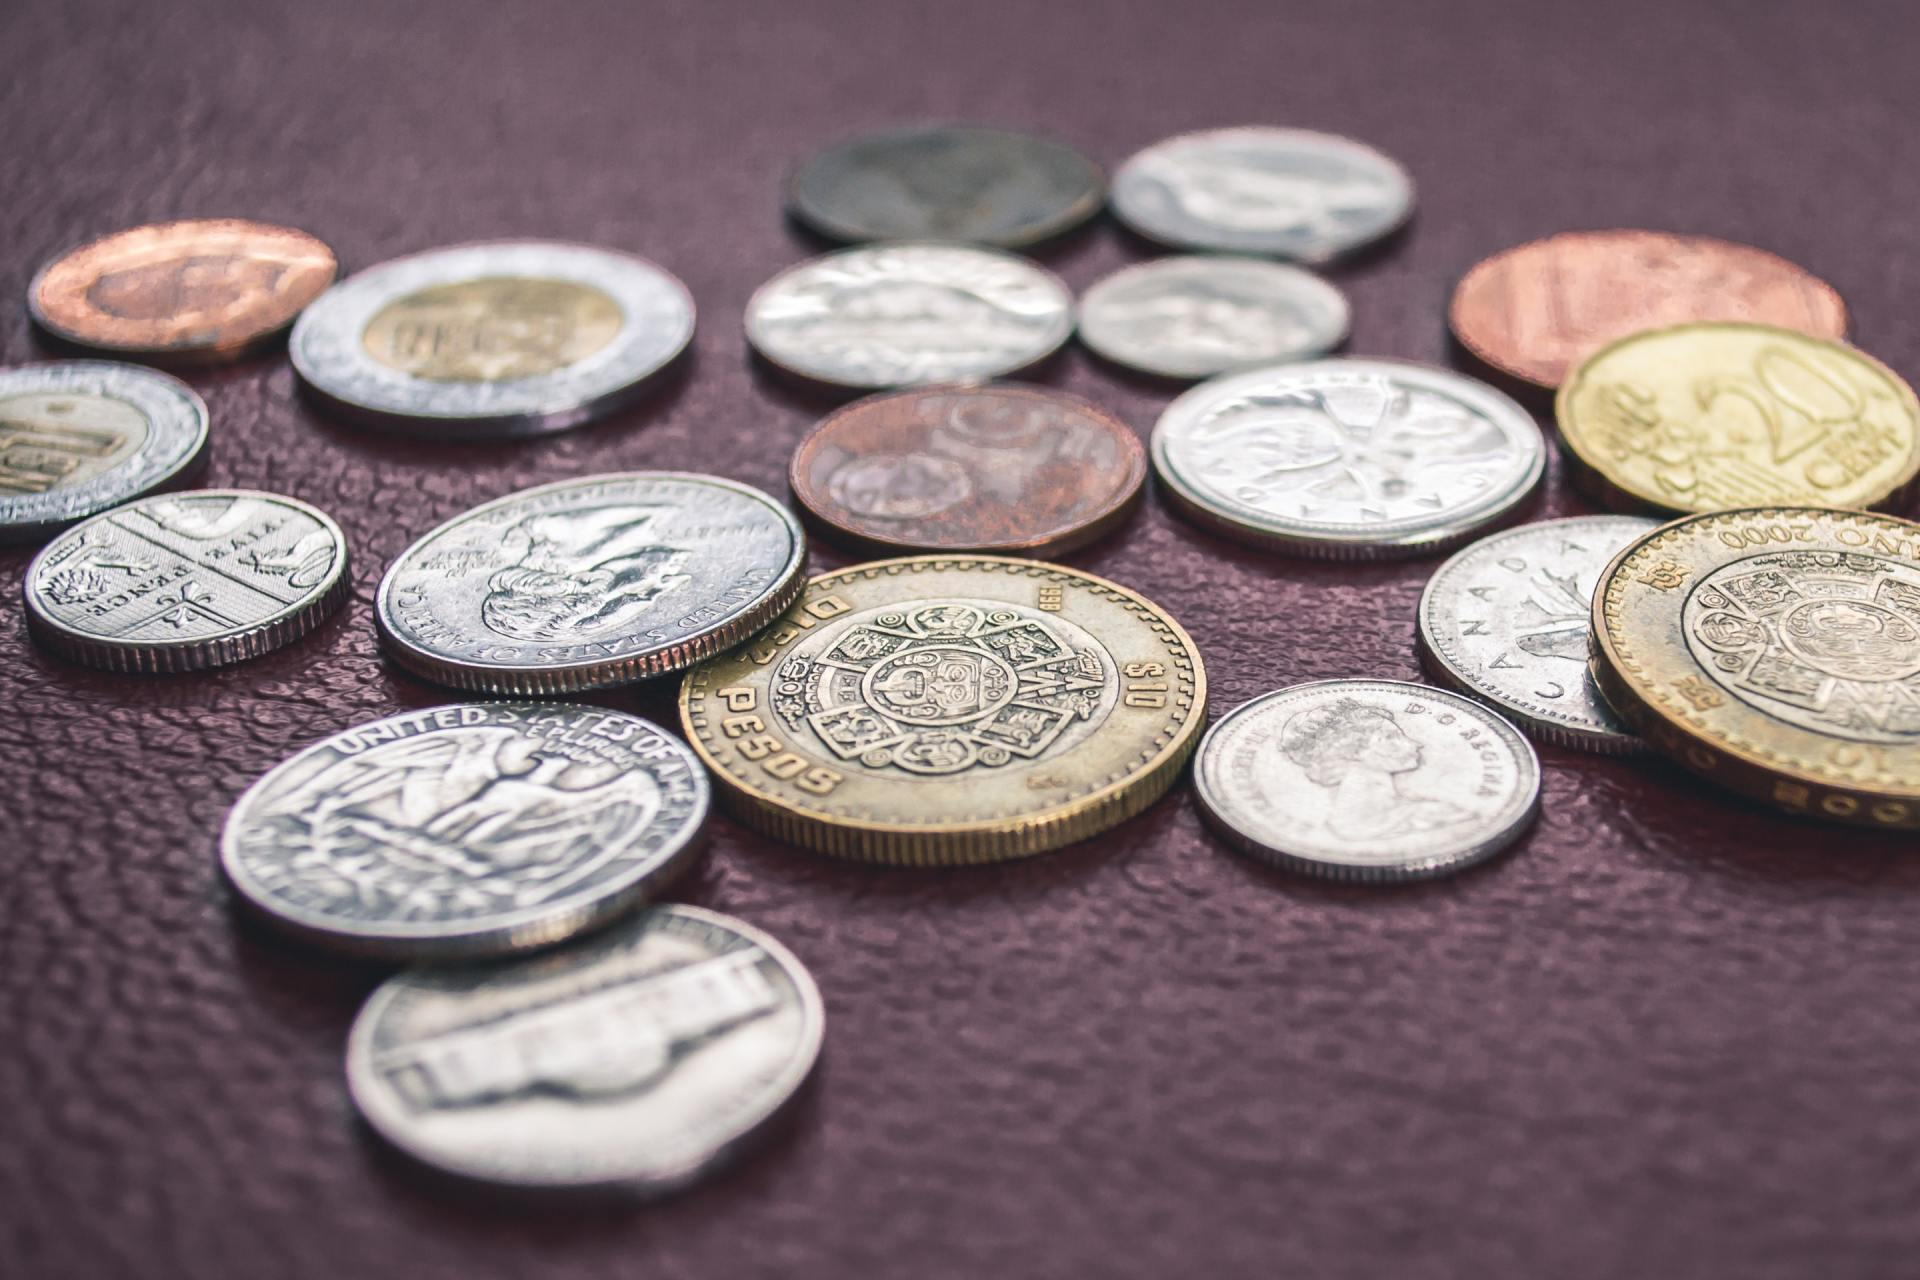 Photograph of coins on a textured purple surface